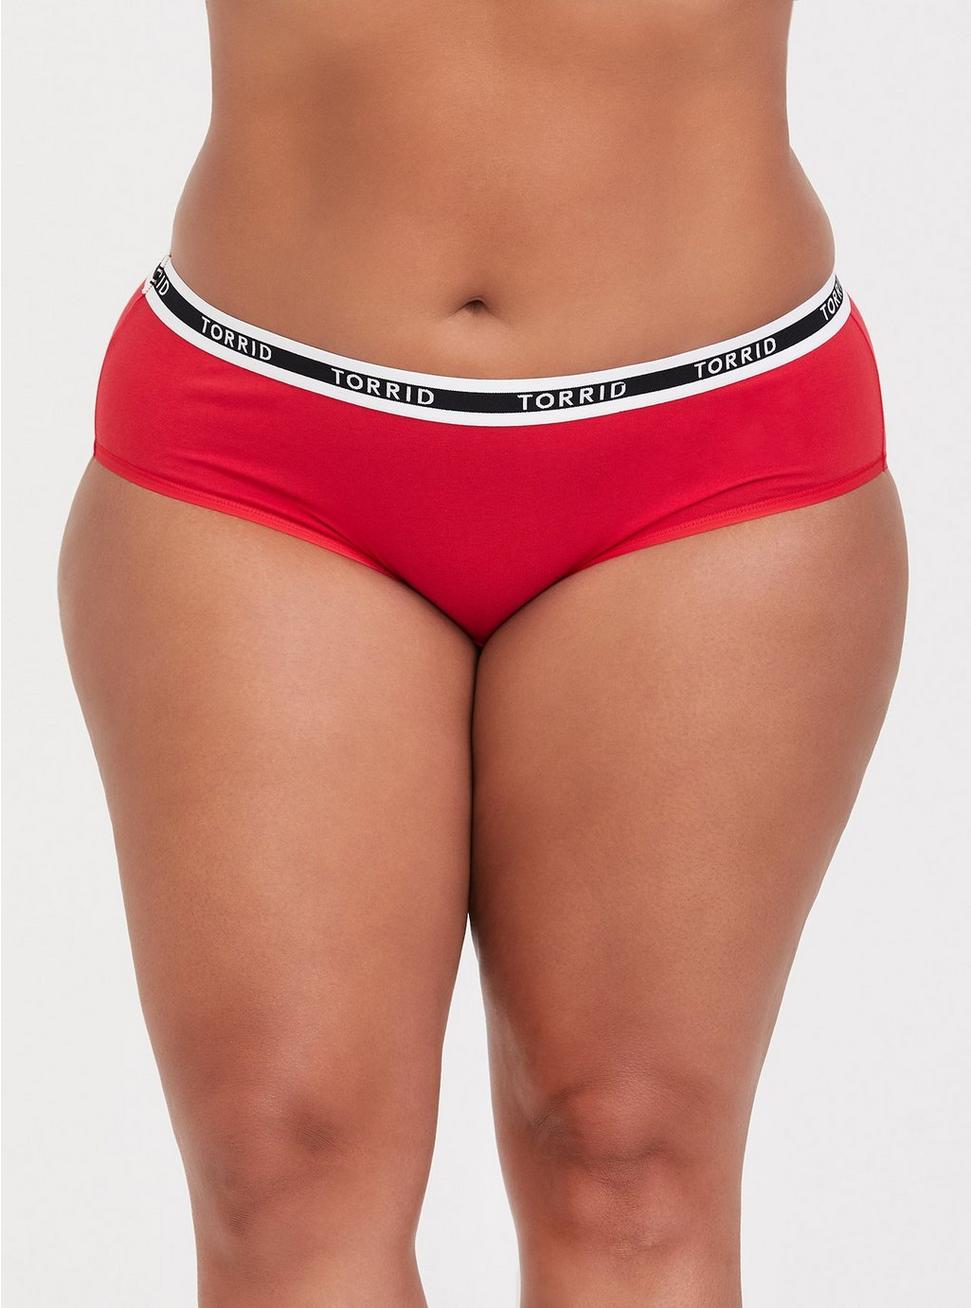 Plus Size Cotton Mid-Rise Hipster Logo Panty, RUBY TUESDAY, hi-res